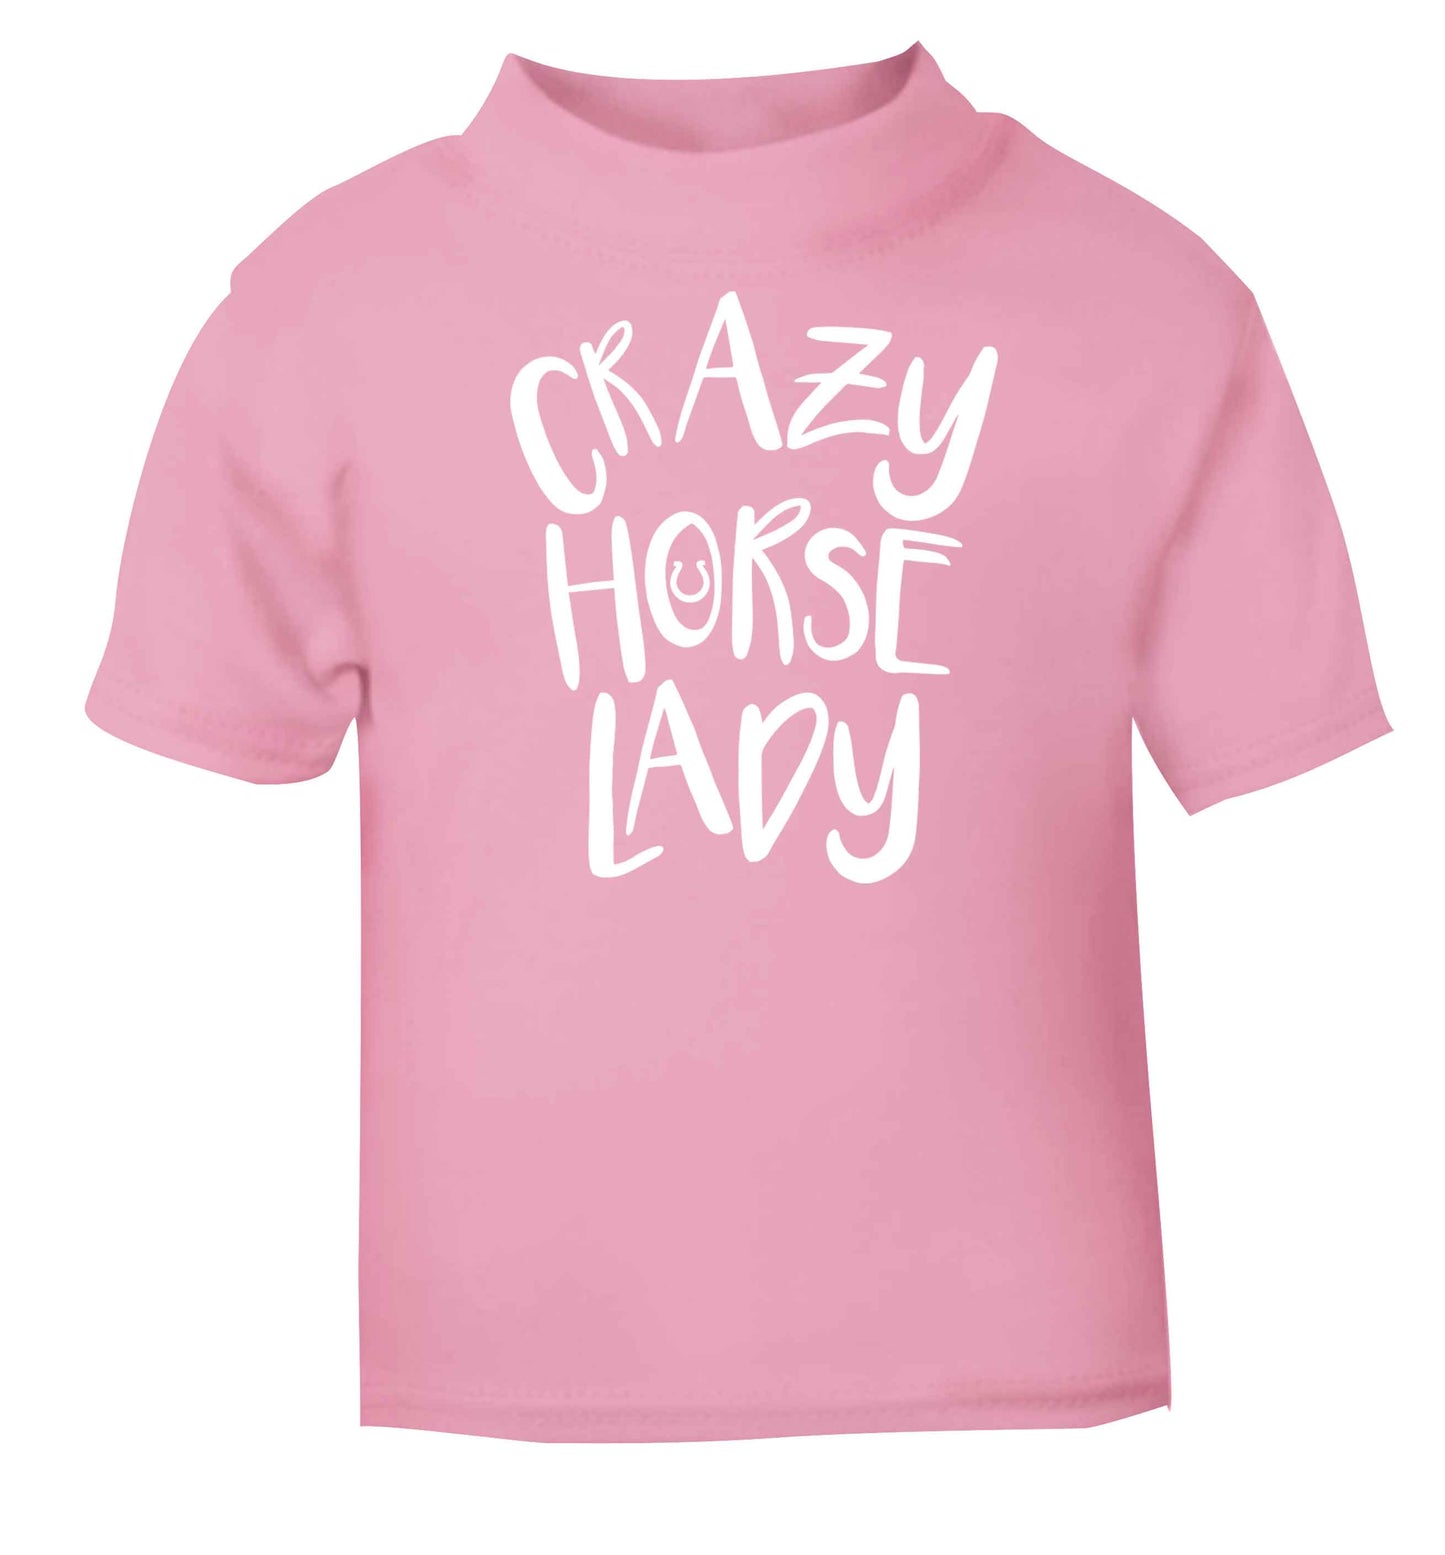 Crazy horse lady light pink baby toddler Tshirt 2 Years